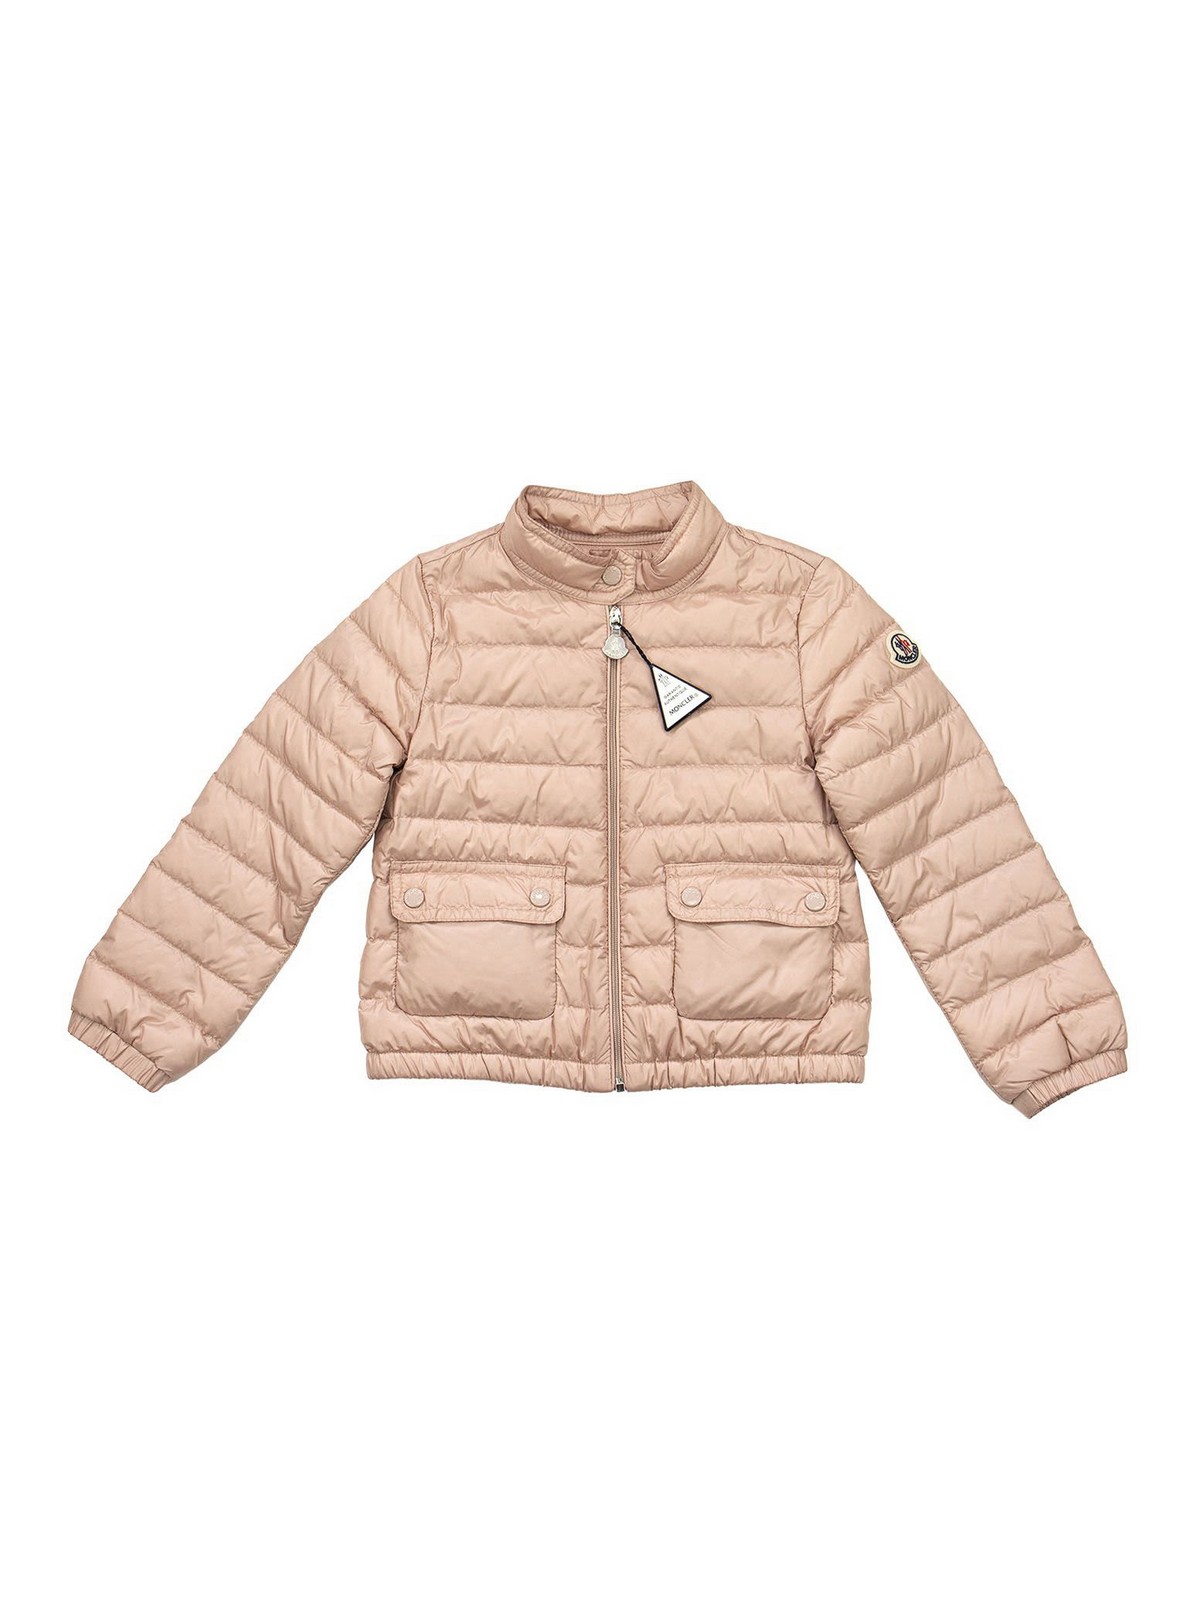 Moncler Kids' New Suzette Puffer Jacket In Pink